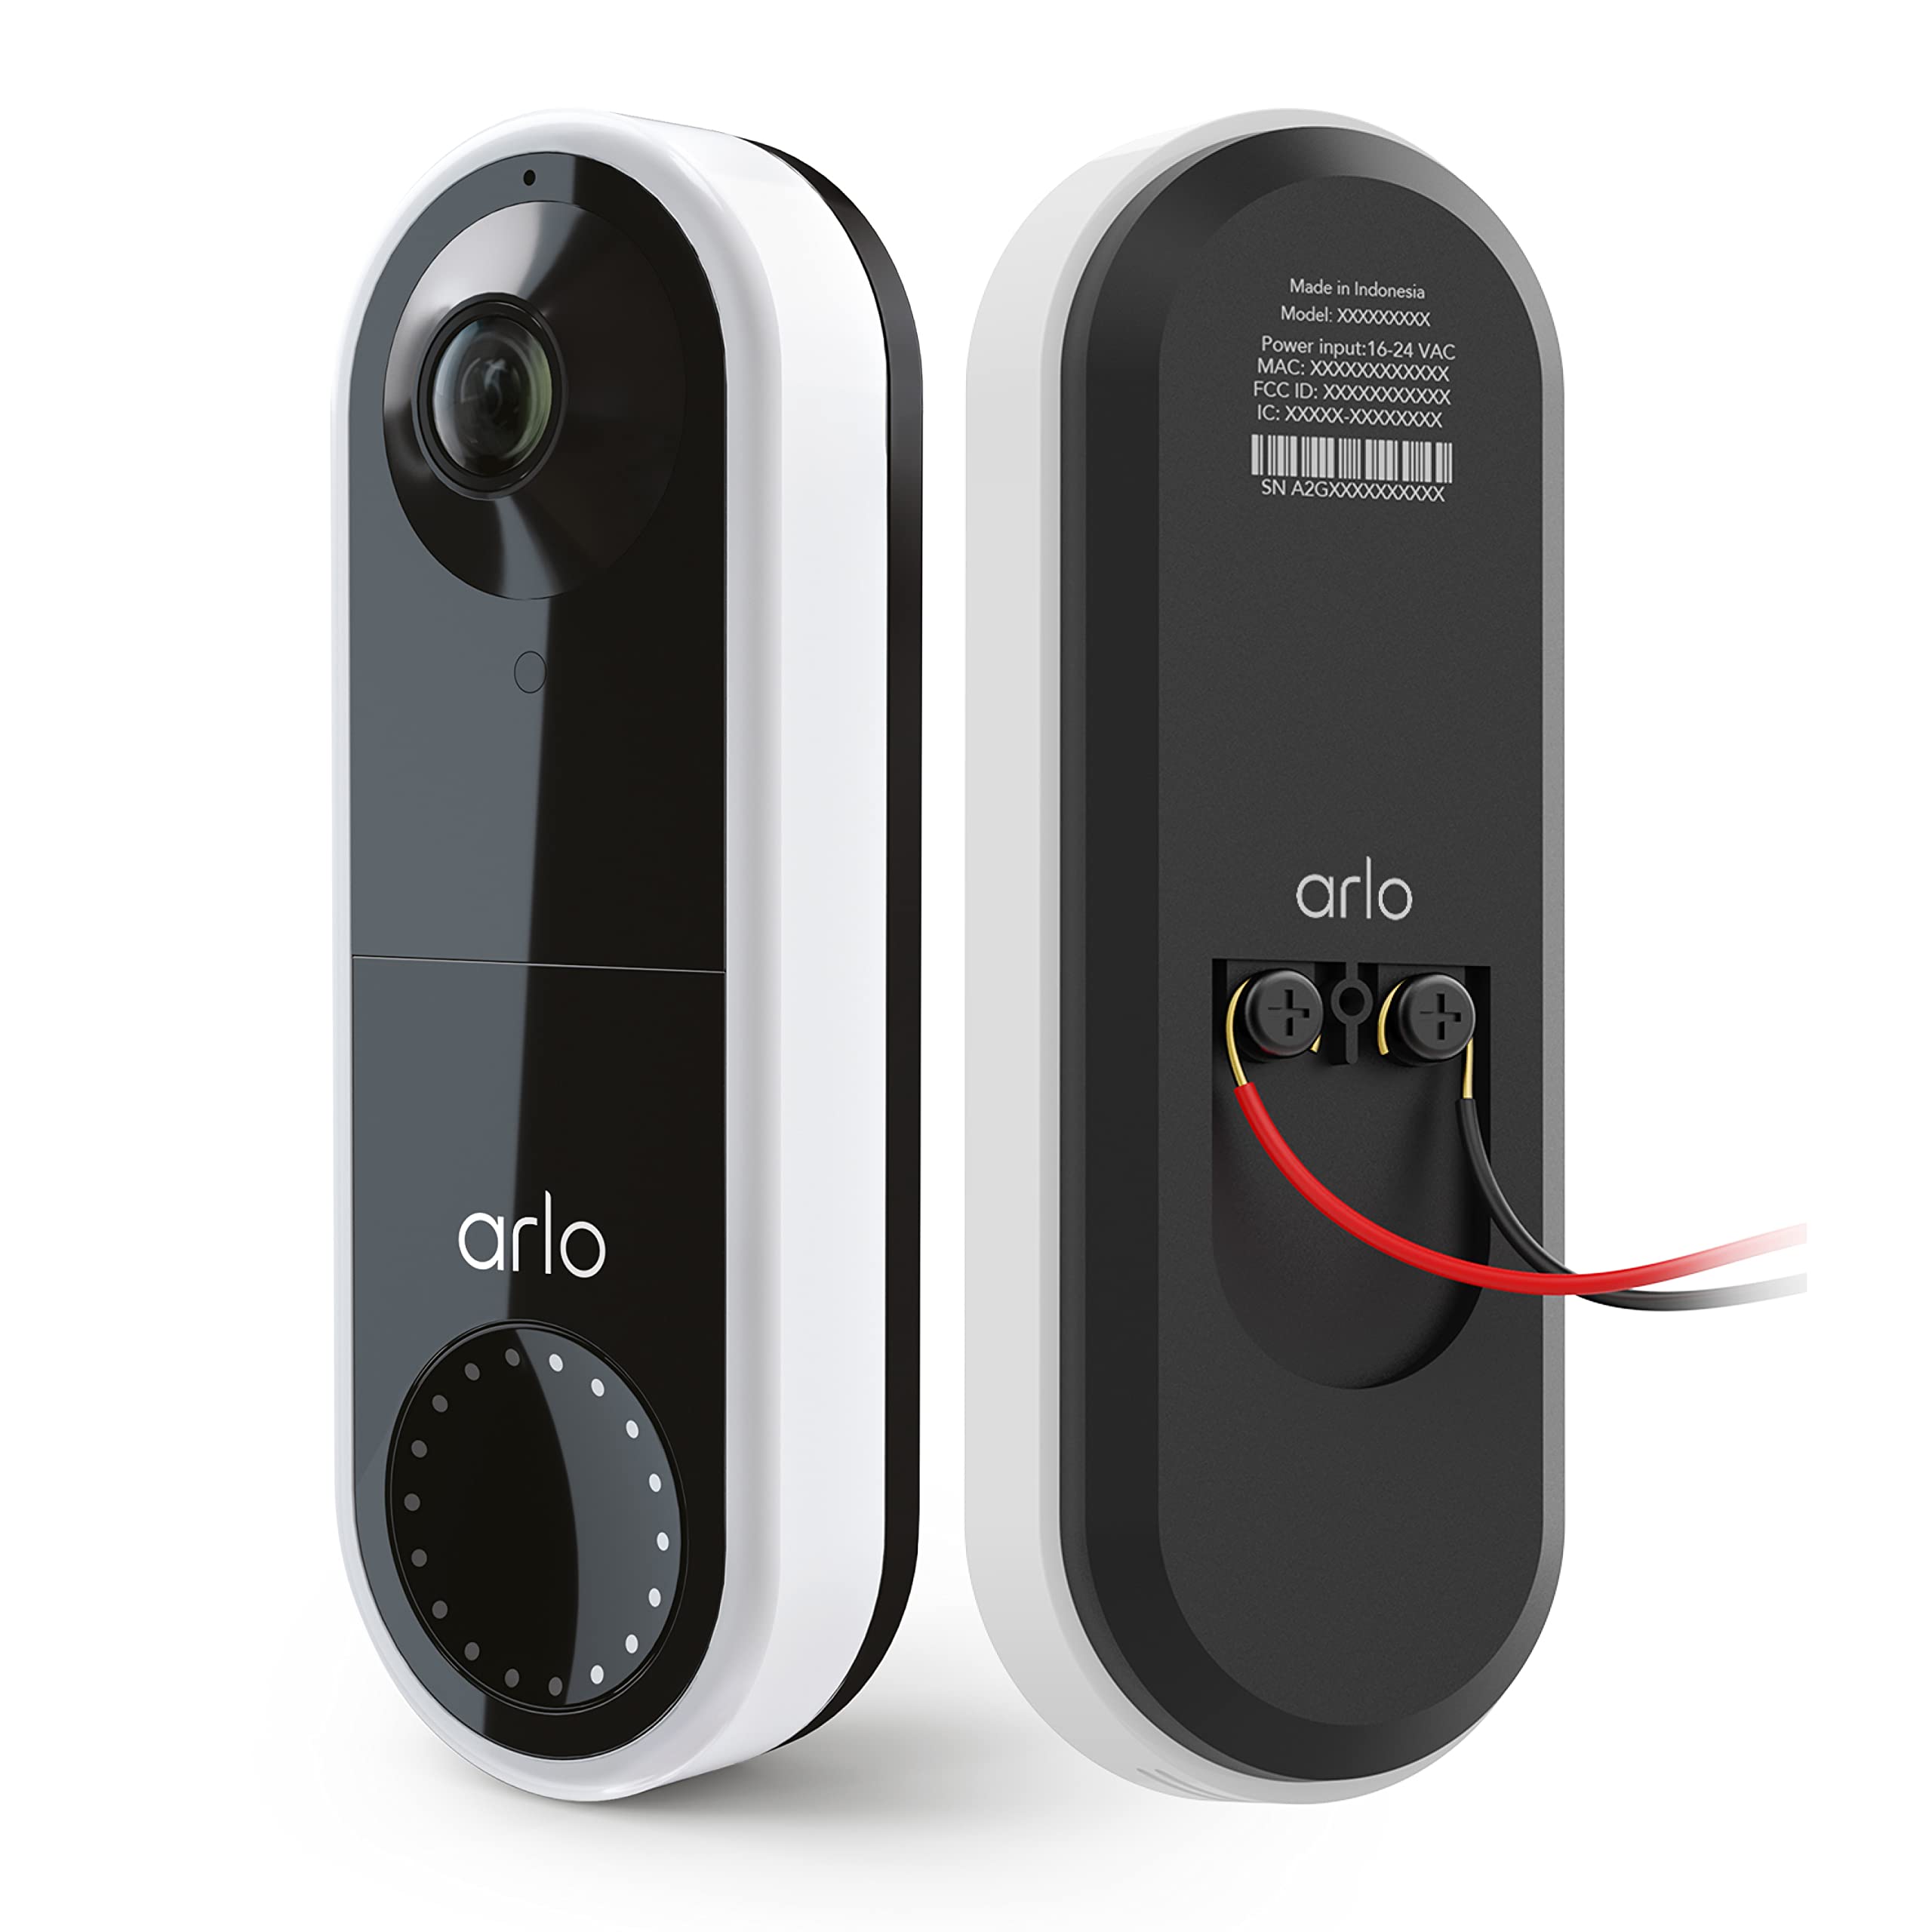 Check for interference from other devices or appliances
Reset the Wi-Fi network settings on the doorbell